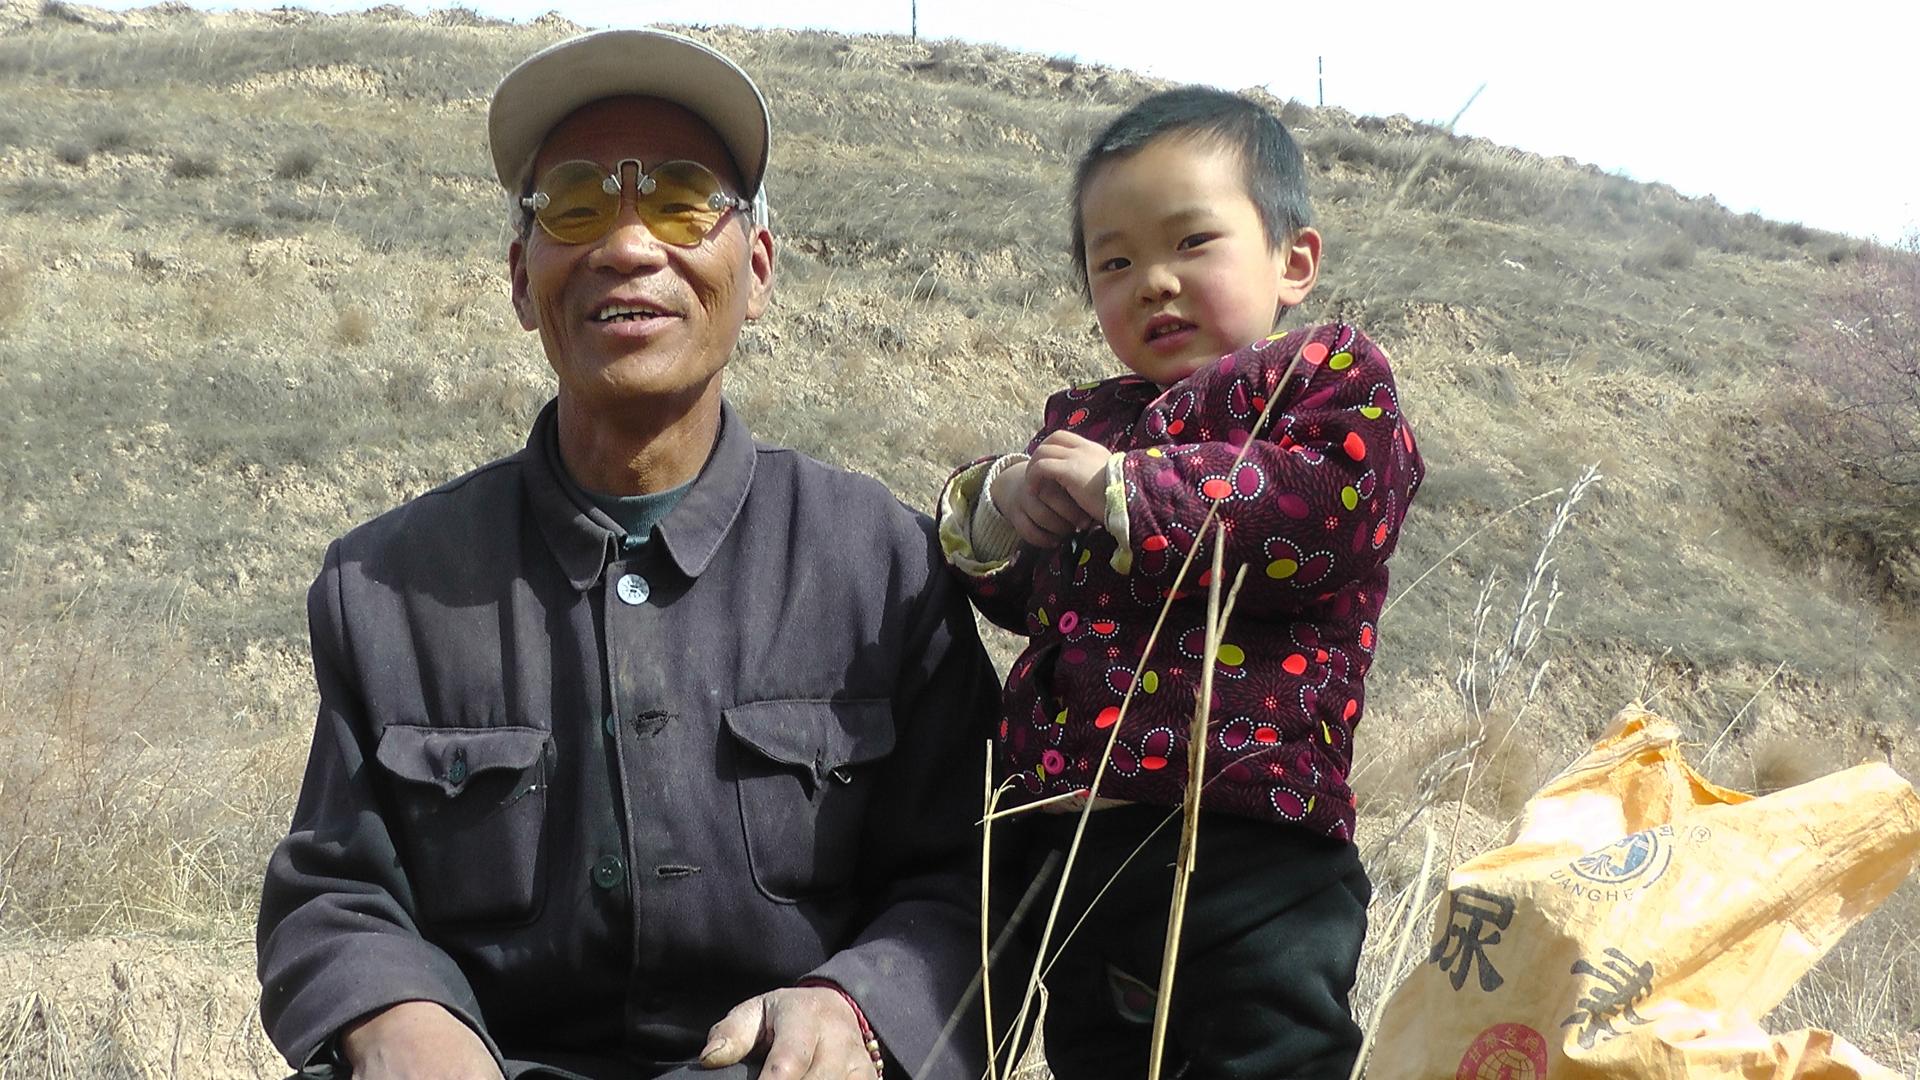 In the parched county of Pengyang, farmer Mi Zhangzhong says a local tree-planting campaign has helped bring more rain.